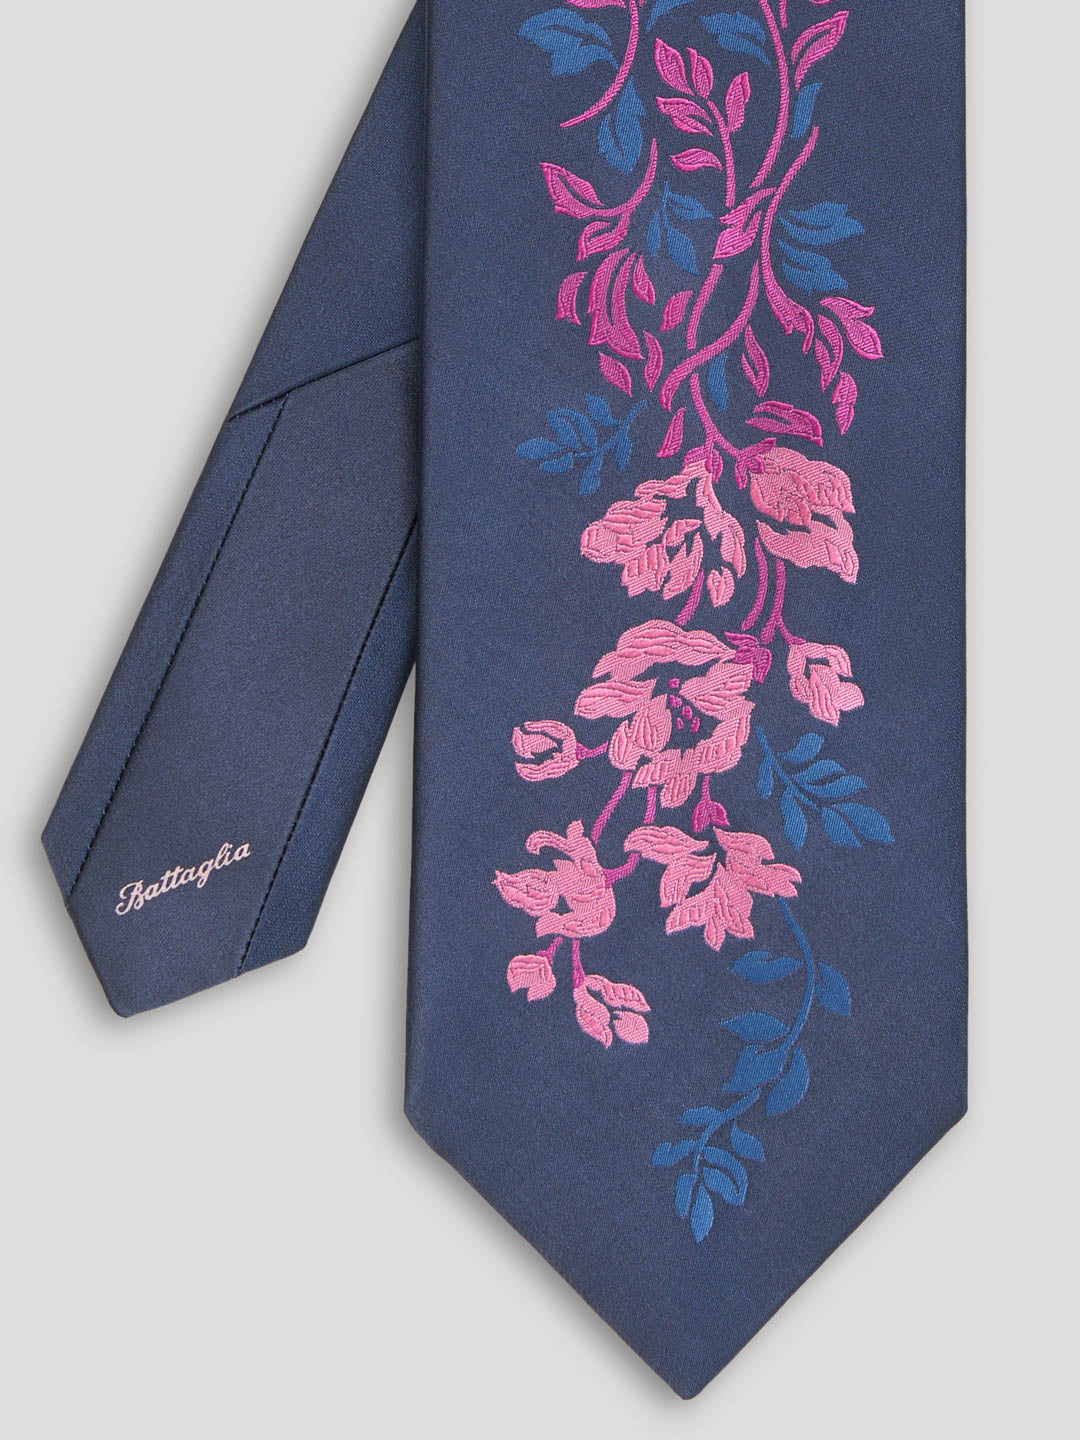 Navy tie with woven pink and blue floral design. 